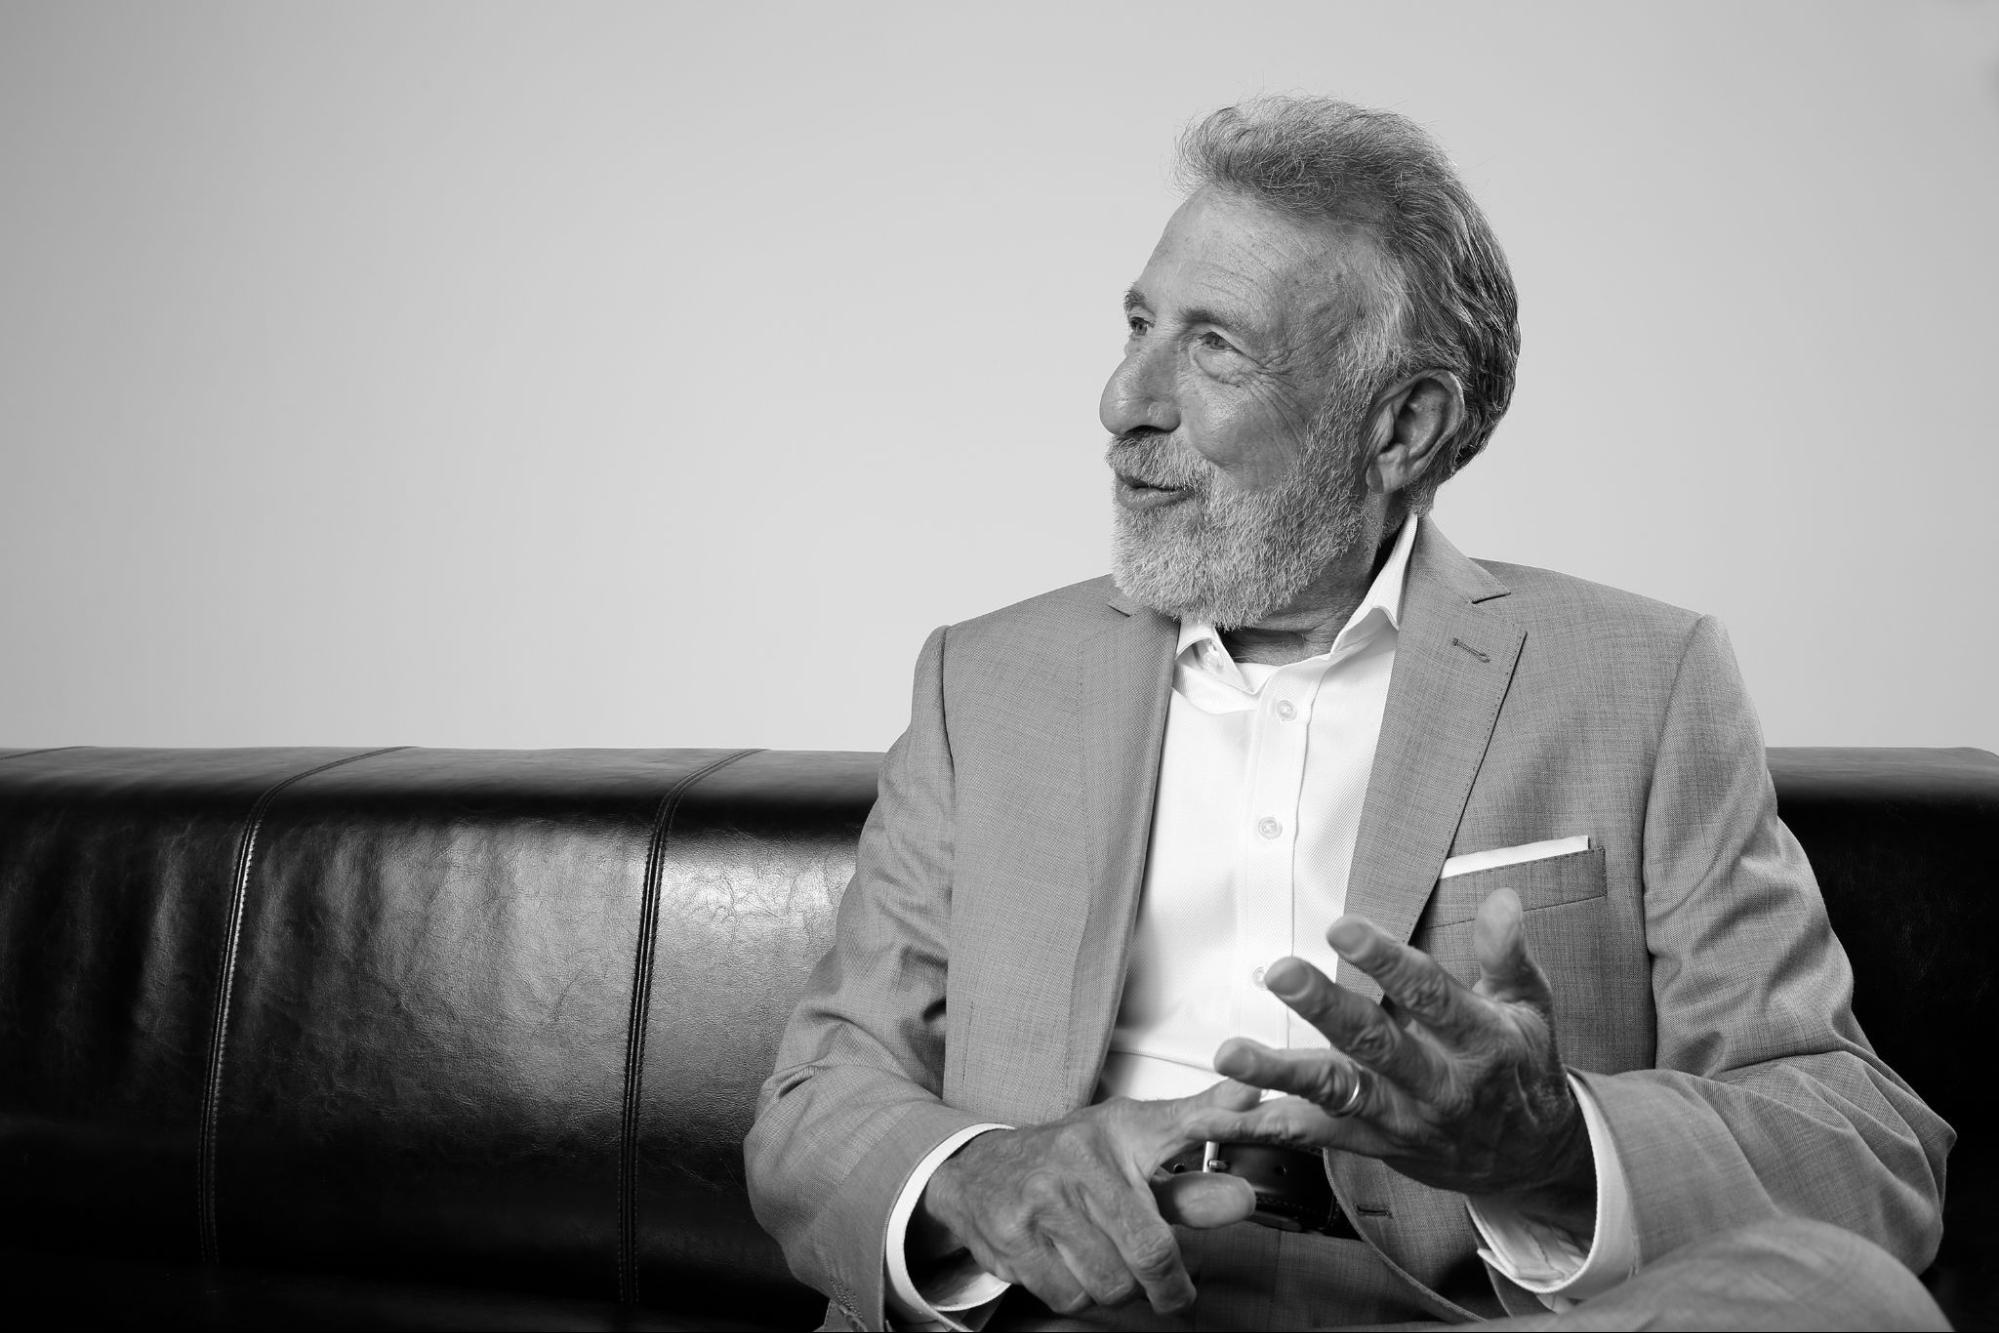 Business for Good: A Conversation With George Zimmer